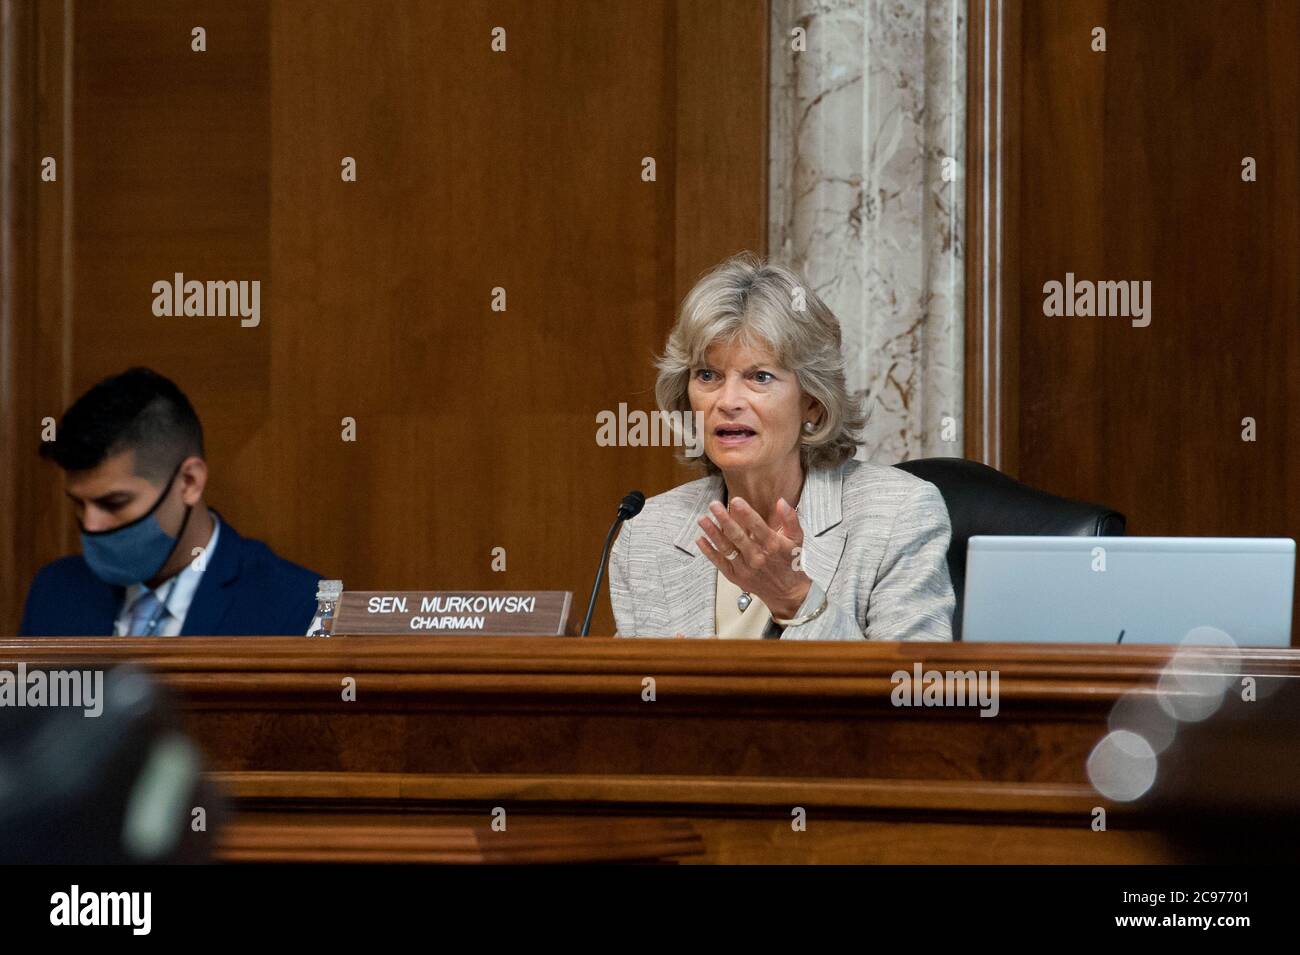 Senate Committee on Energy and Natural Resources Chairman Sen. Lisa Murkowski, R-AK, asks questions of the panel during a hearing to examine the development and deployment of large-scale carbon dioxide management technologies in the United States, including technological and natural carbon removal, carbon utilization, and carbon storage, in the Dirksen Senate Office Building on Capitol Hill in Washington, DC., Tuesday, July 28, 2020. Credit: Rod Lamkey / CNP /MediaPunch Stock Photo